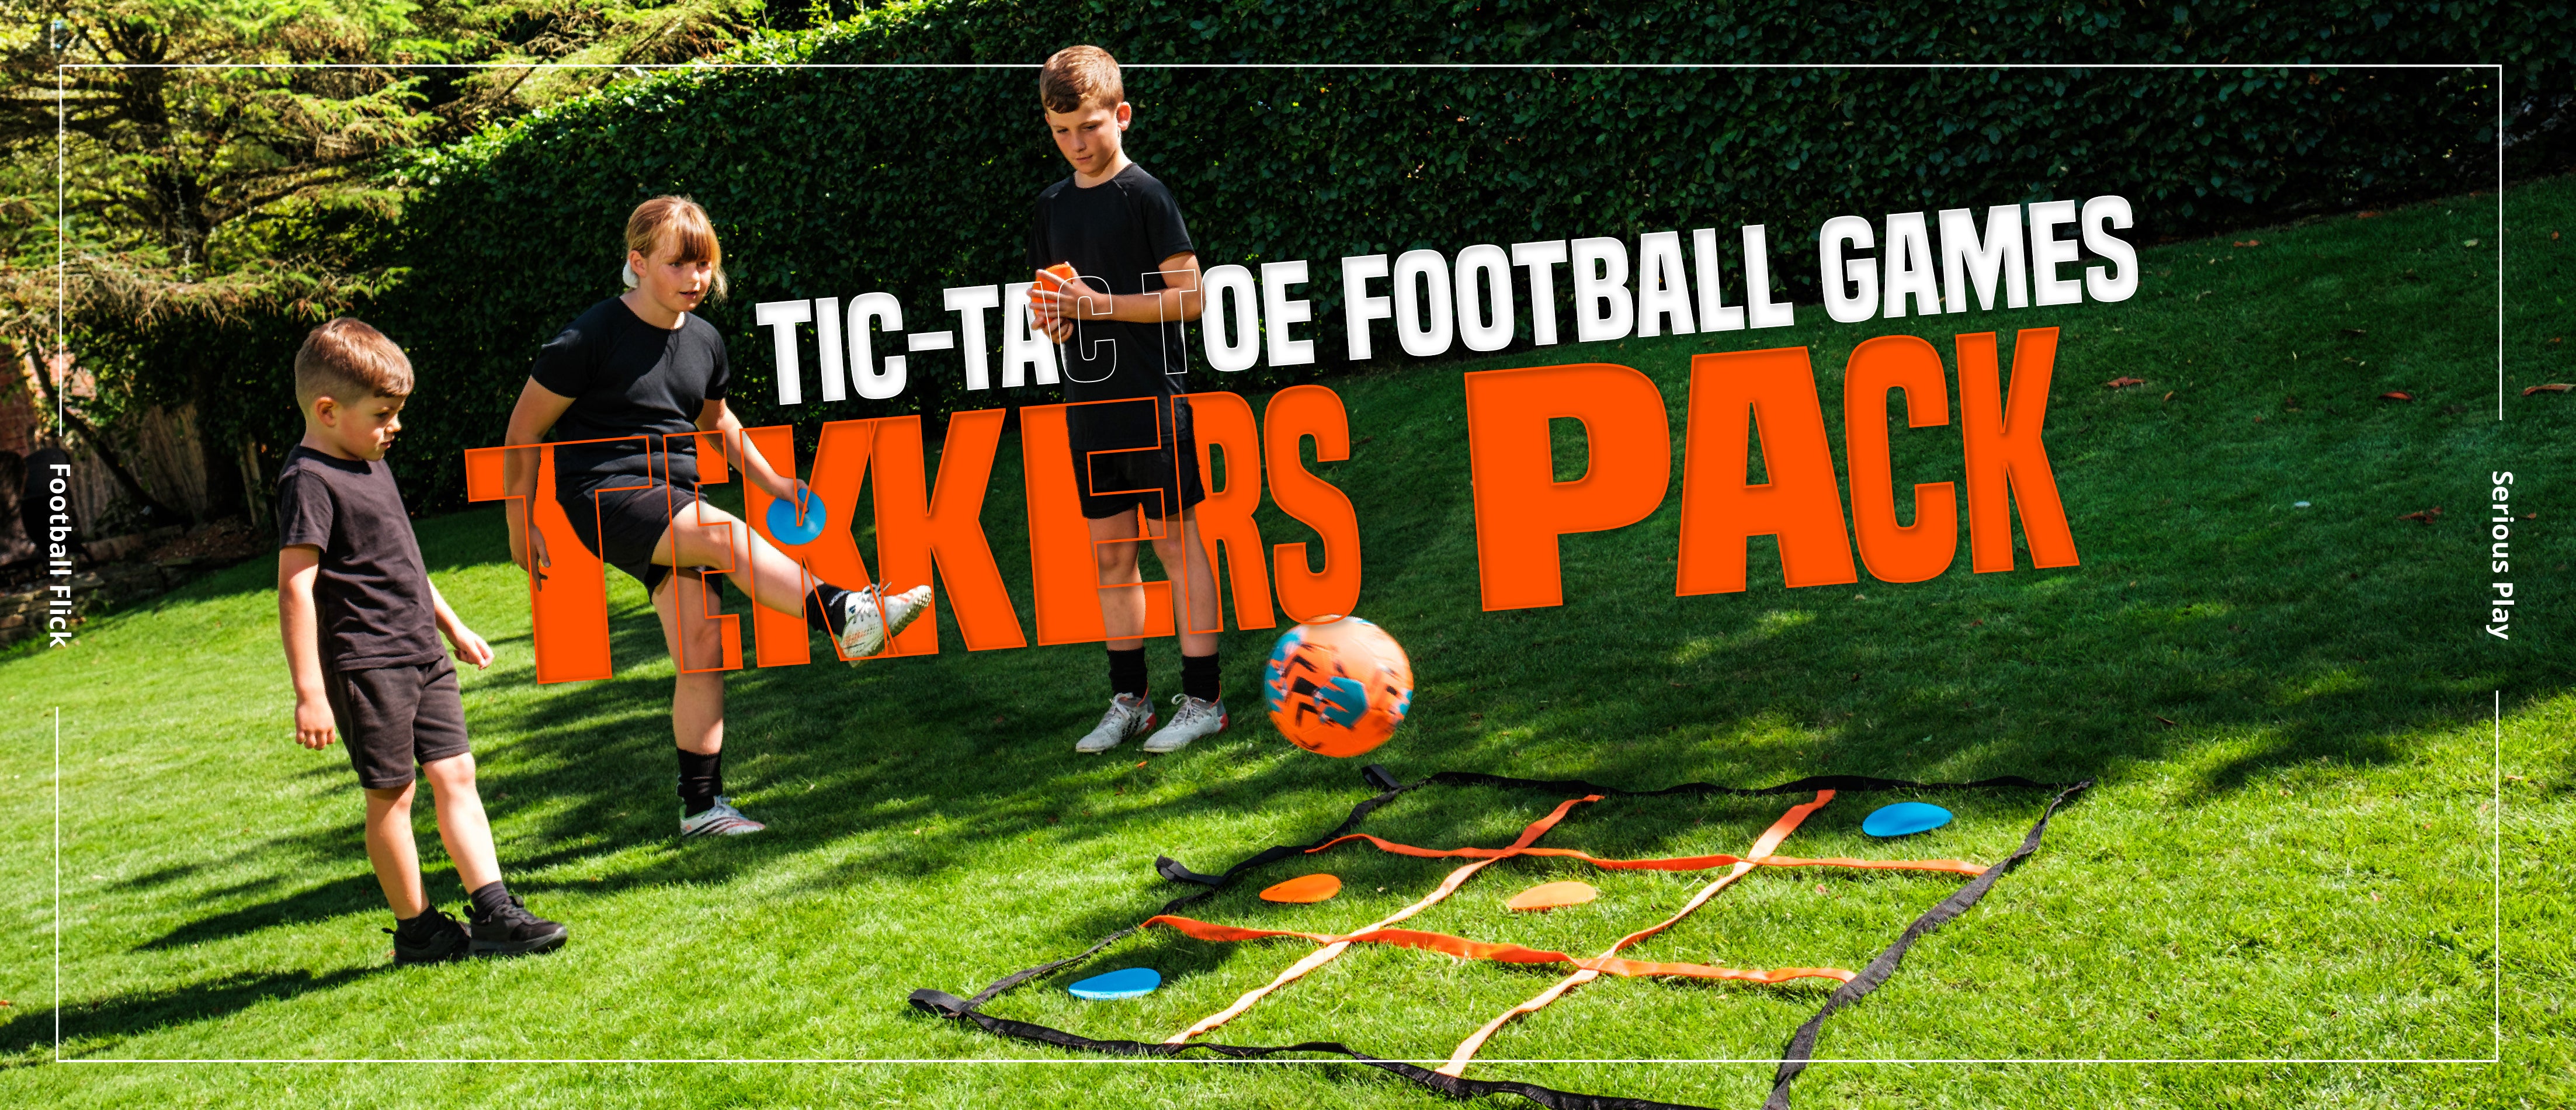 Tic-Tac-Toe Football and Other Games to Play With the Tekkers Pack! –  Football Flick